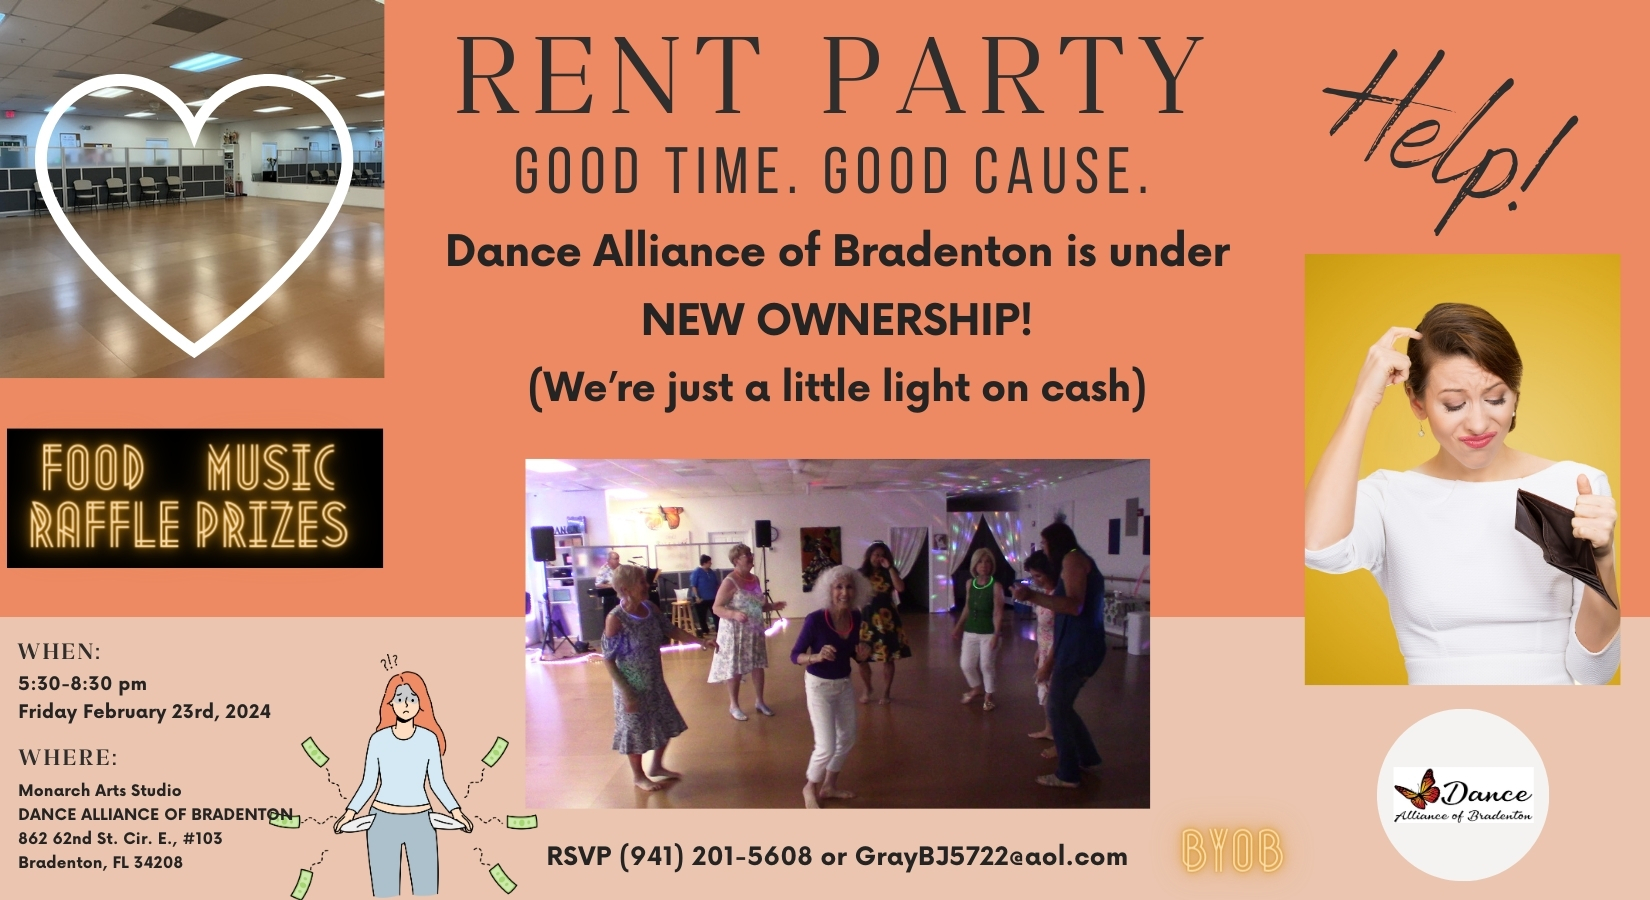 Dance Alliance of Bradenton is Having a Rent Party!